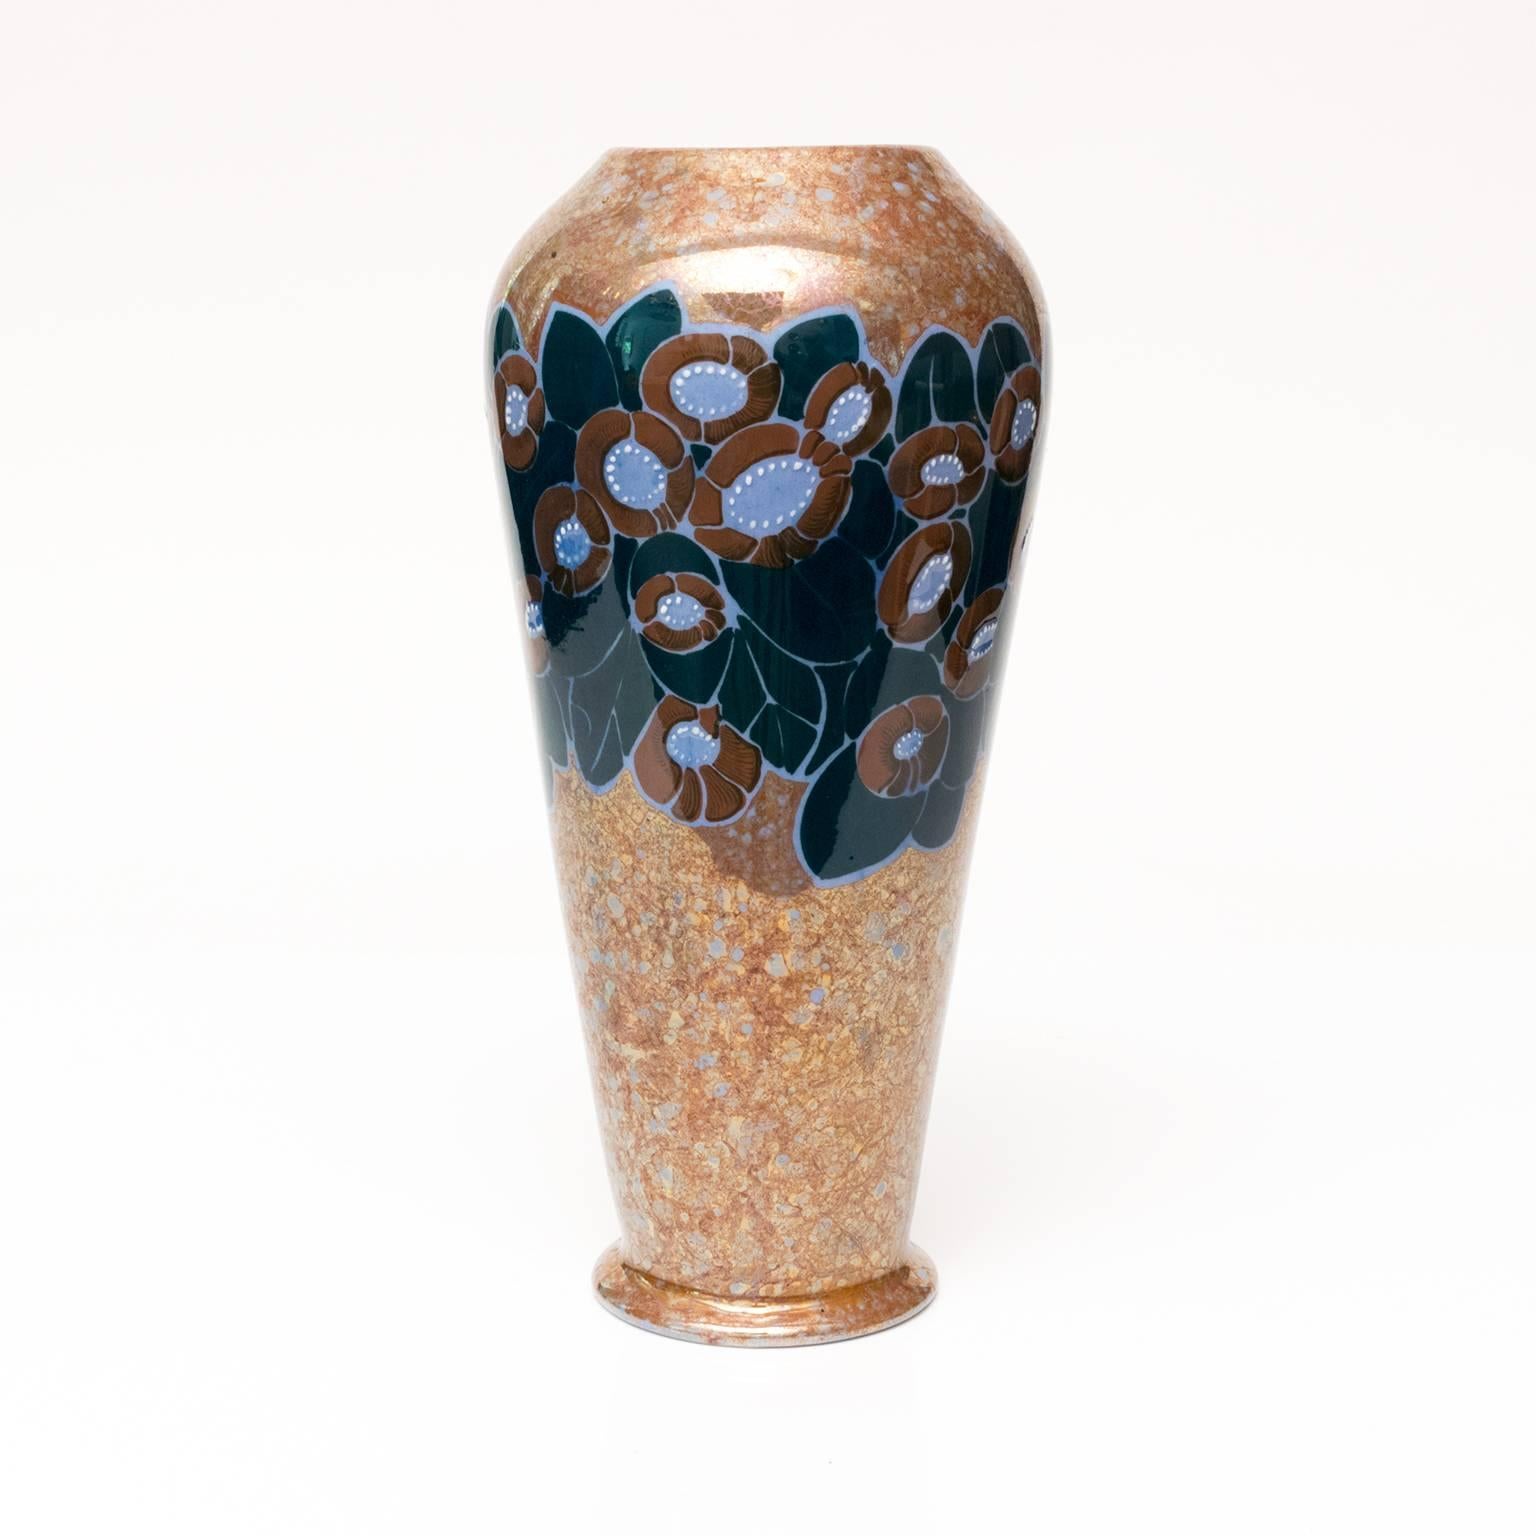 Large Scandinavian modern luster glazed ceramic vase with floral motif on a marbleized ground. Made by Arabia Oy, Helsinki, Finland. Designed by Thure Öberg, signed on bottom 